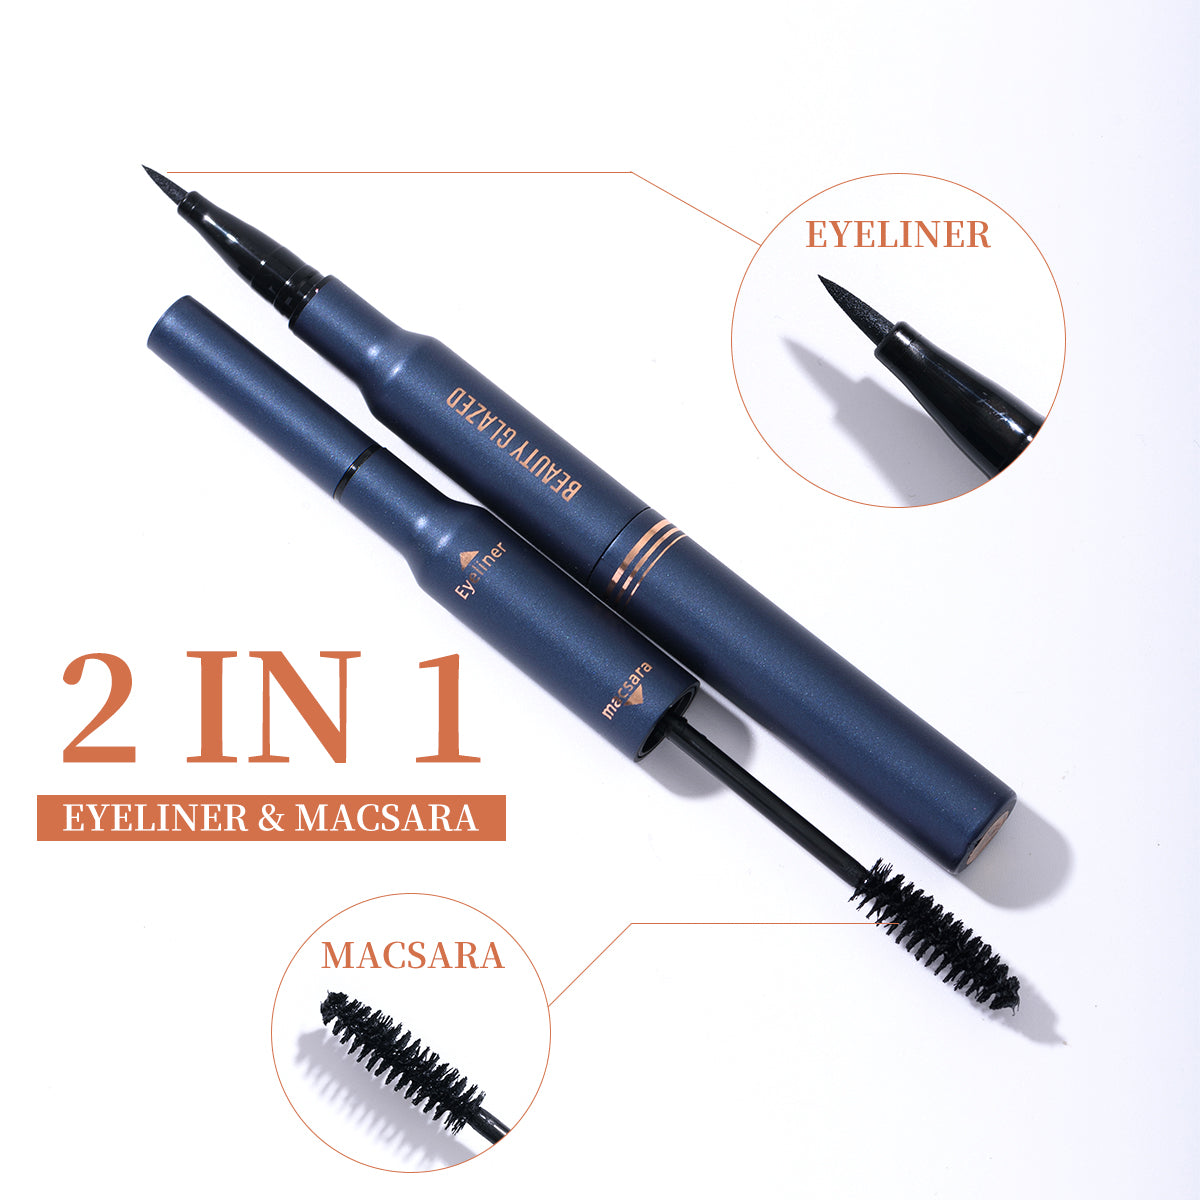 2 in 1 Eyeliner and Mascara